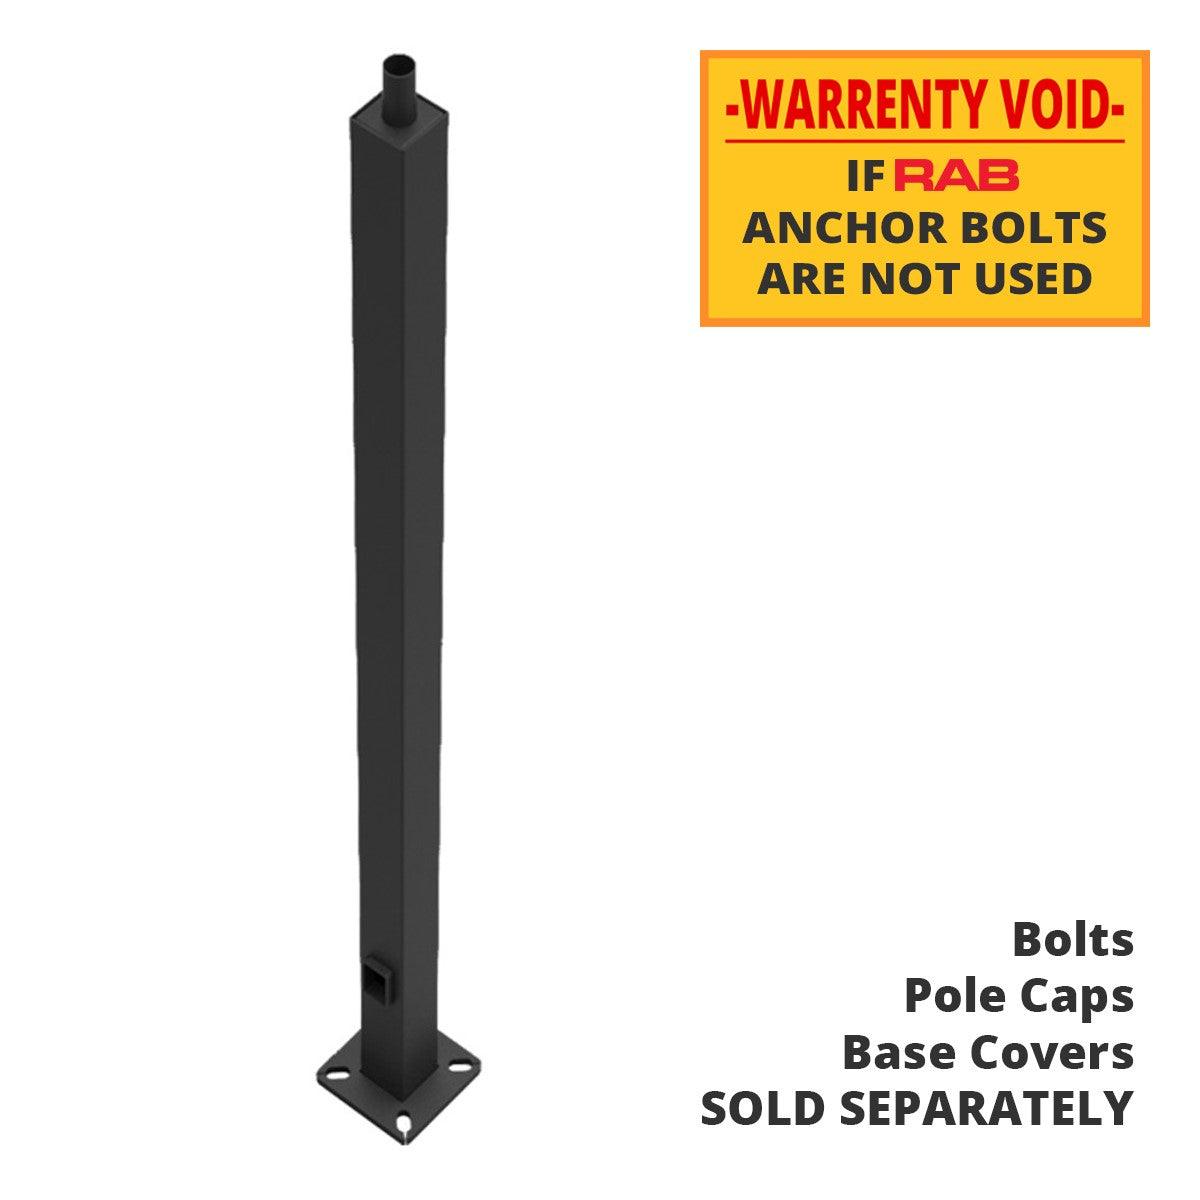 20 Ft Square Steel Tenon Top Pole 4 In. Shaft 7 Gauge